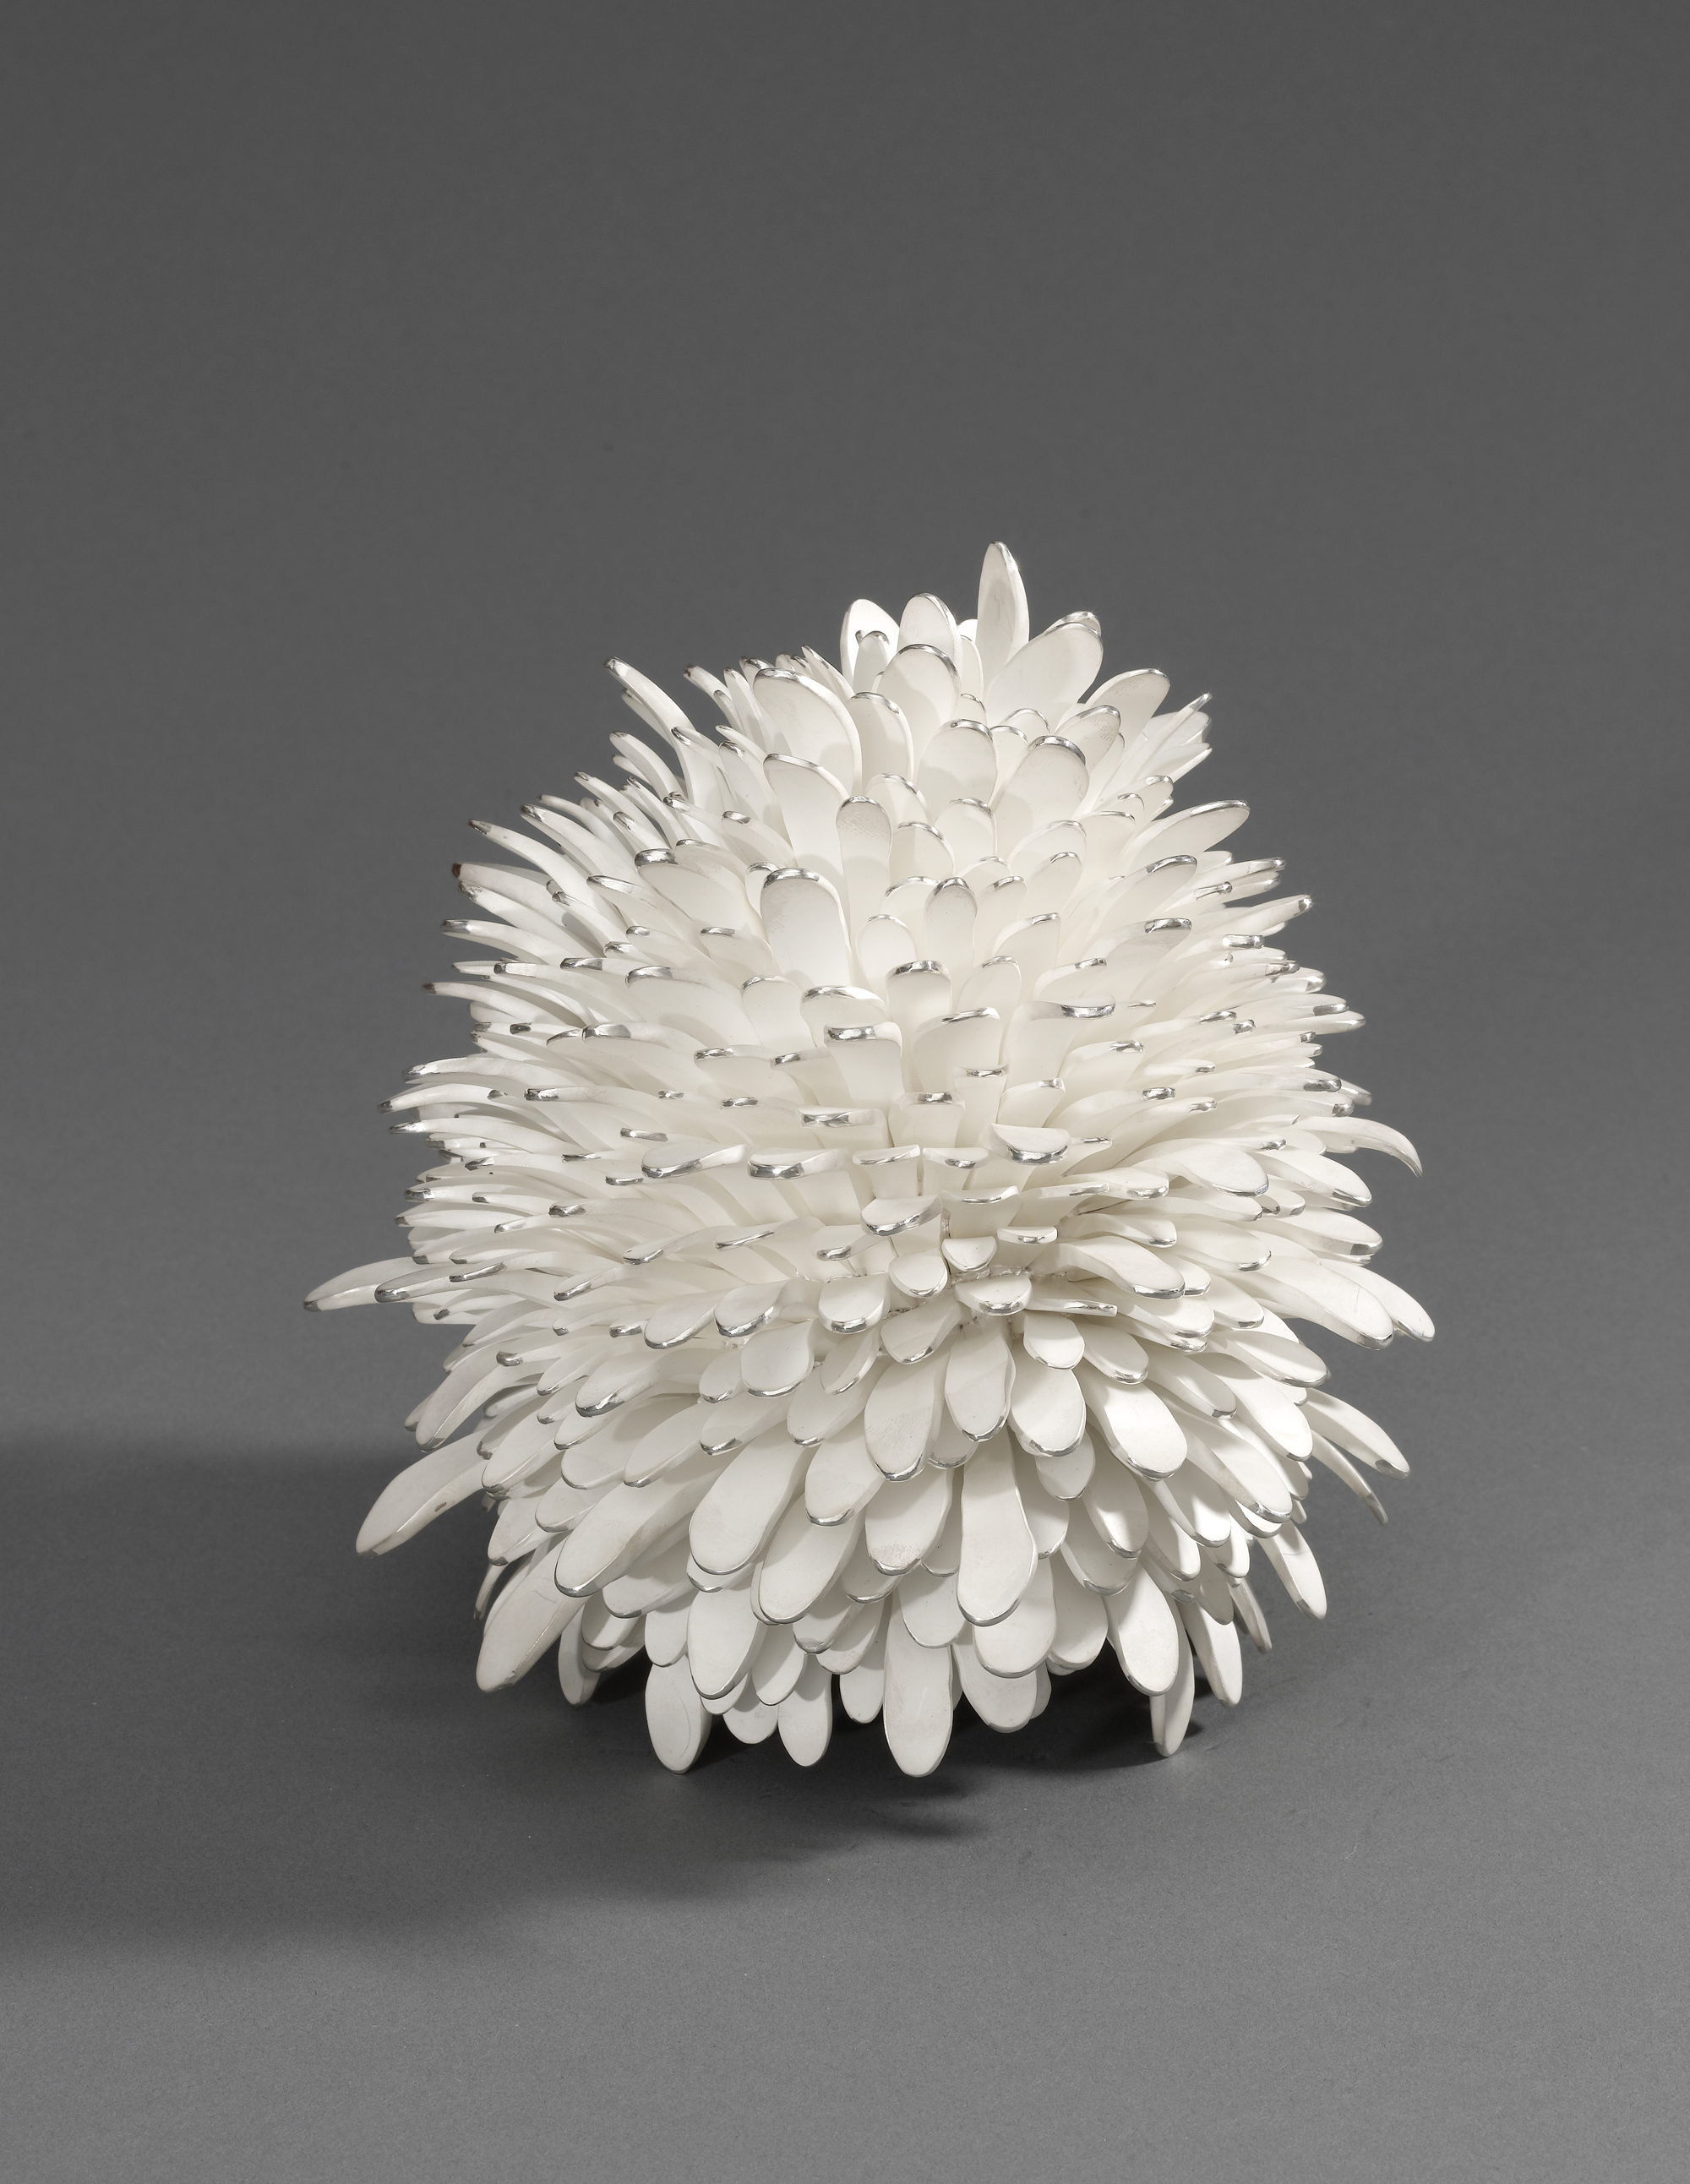 ‘Pine Cone’, 2007, Junko Mori. Measurements: Height 16cm Width 17cm. Image © The Goldsmiths’ Company. Courtesy ‘Collection: The Worshipful Company of Goldsmiths’. '